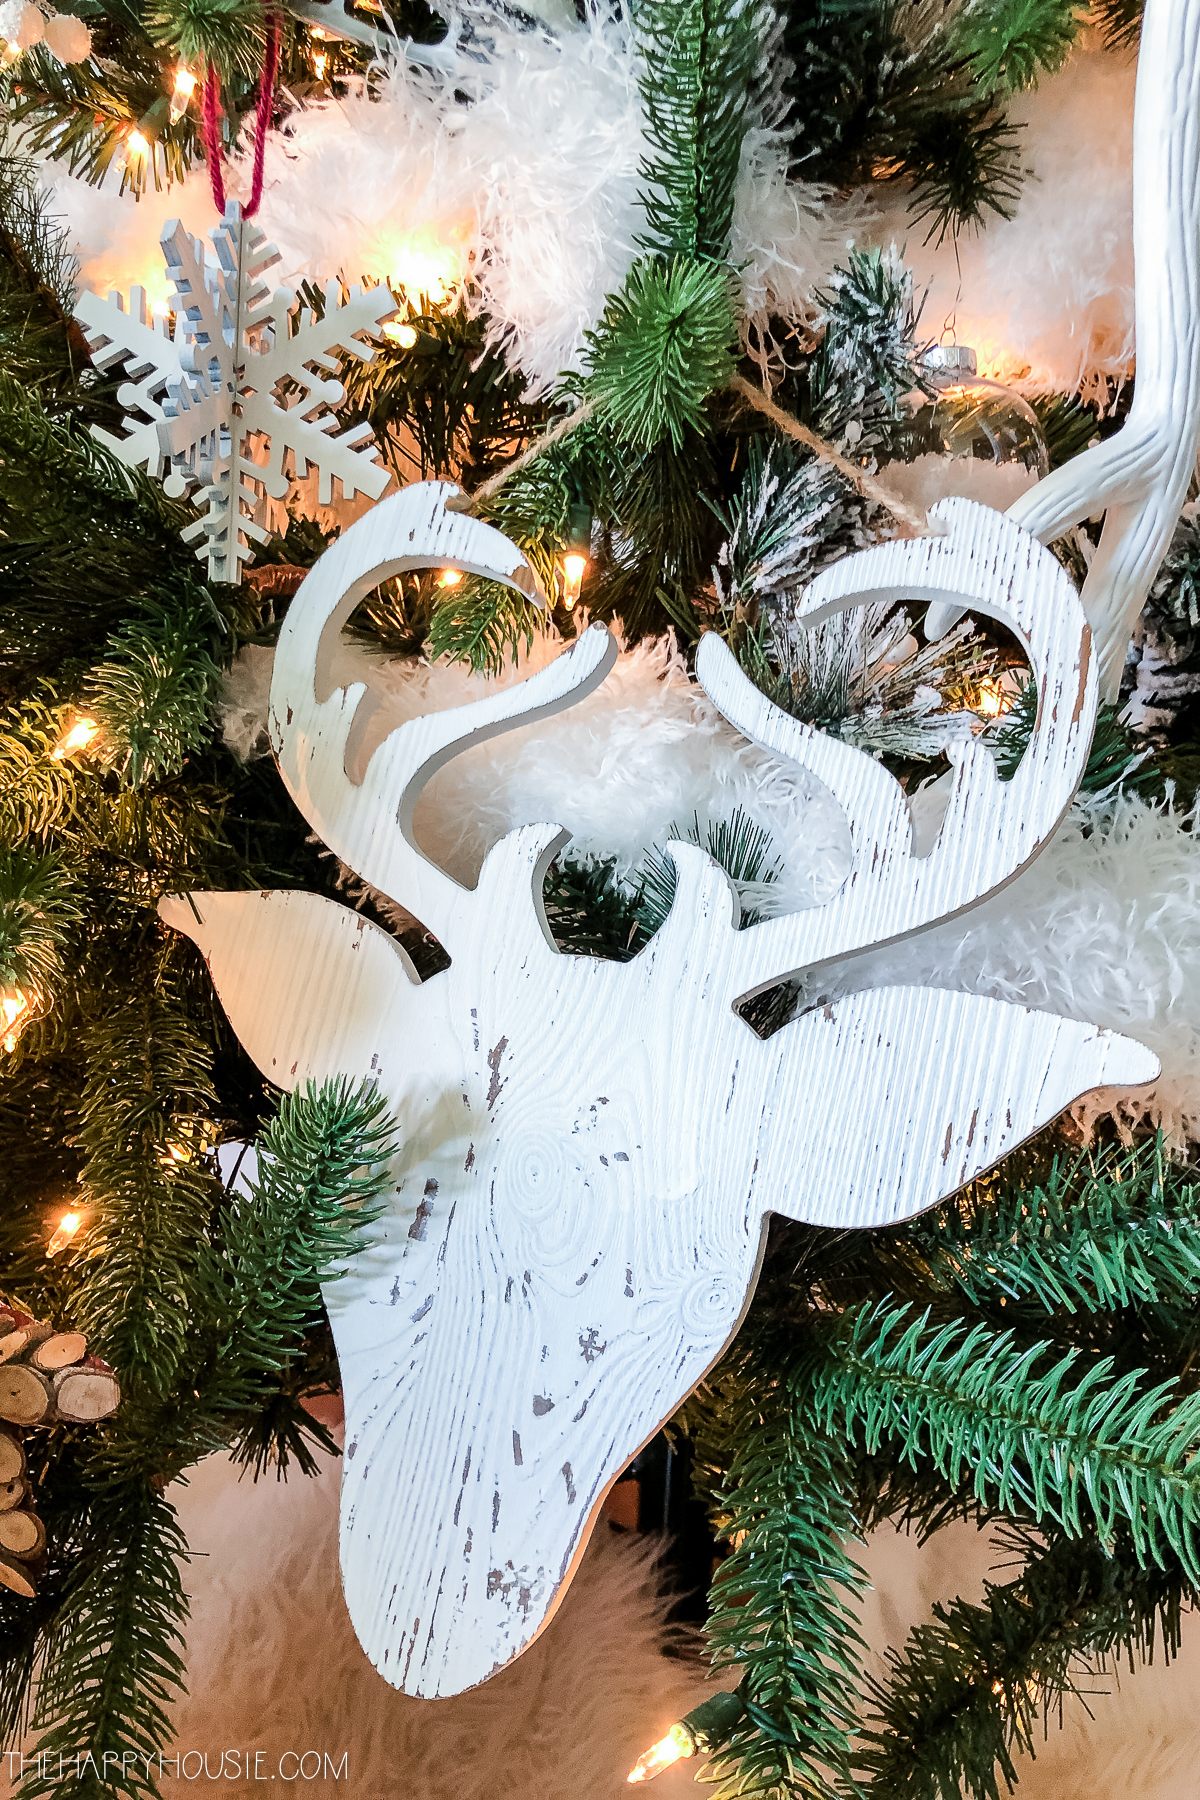 A wooden deer with antlers is sitting on the Christmas tree.